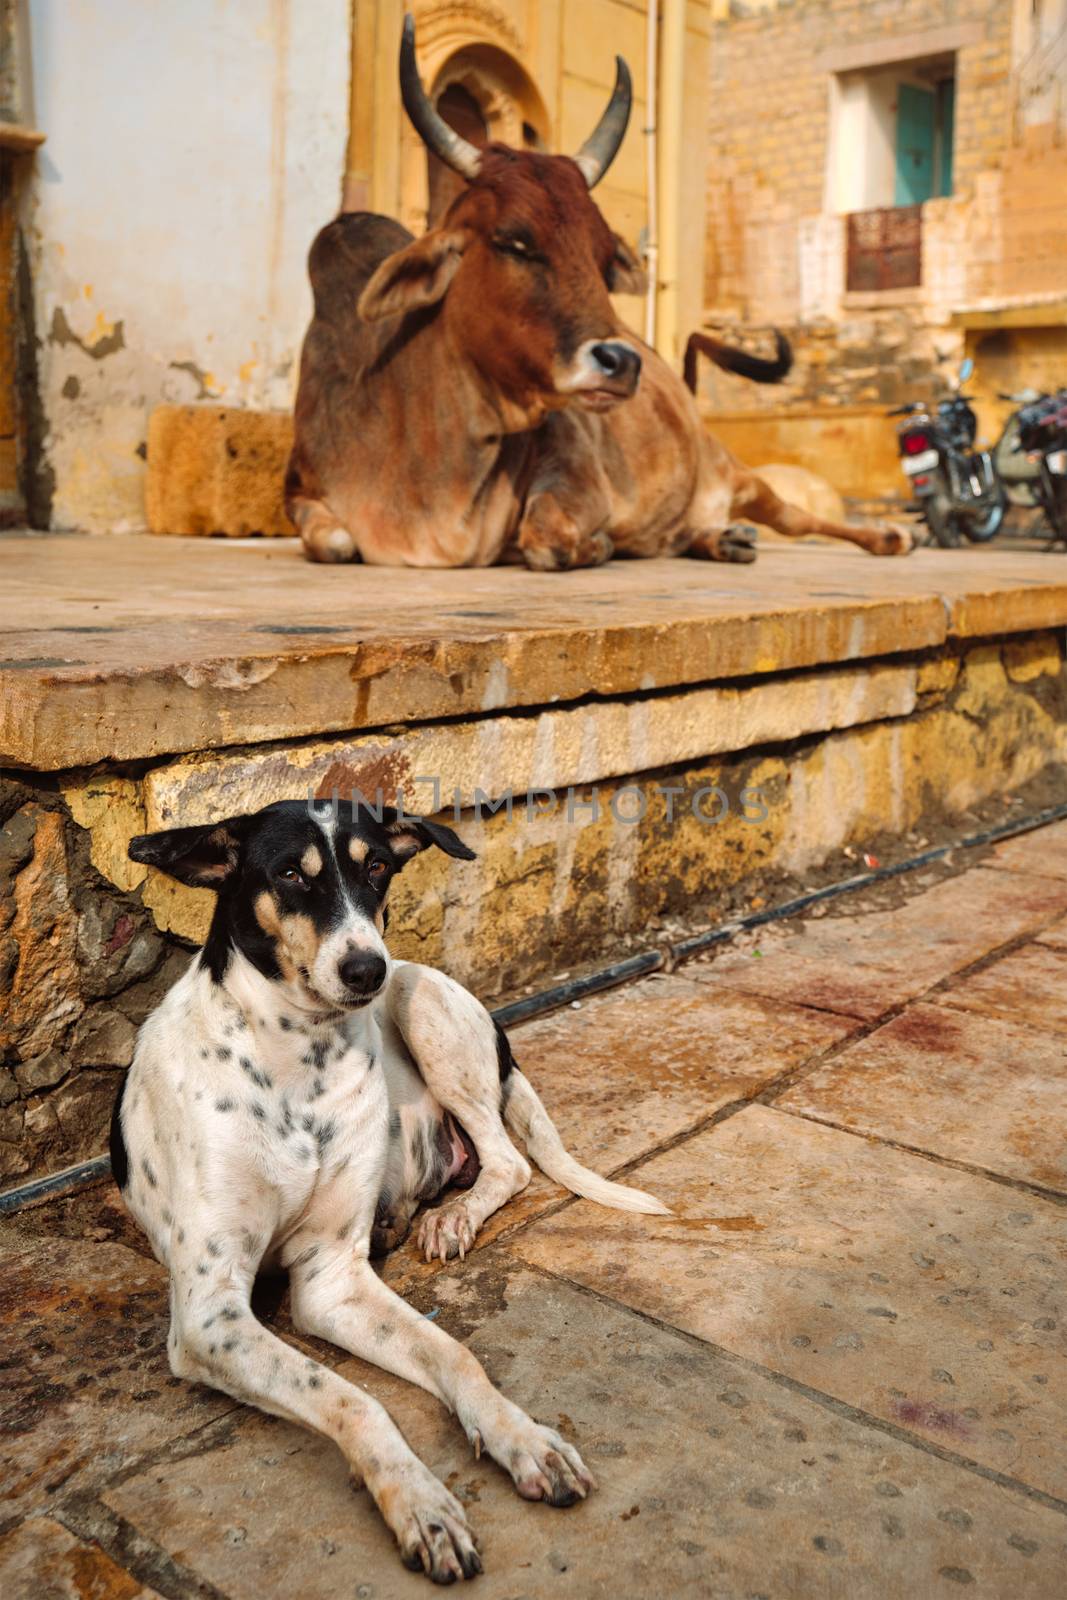 Indian cow resting in the street by dimol